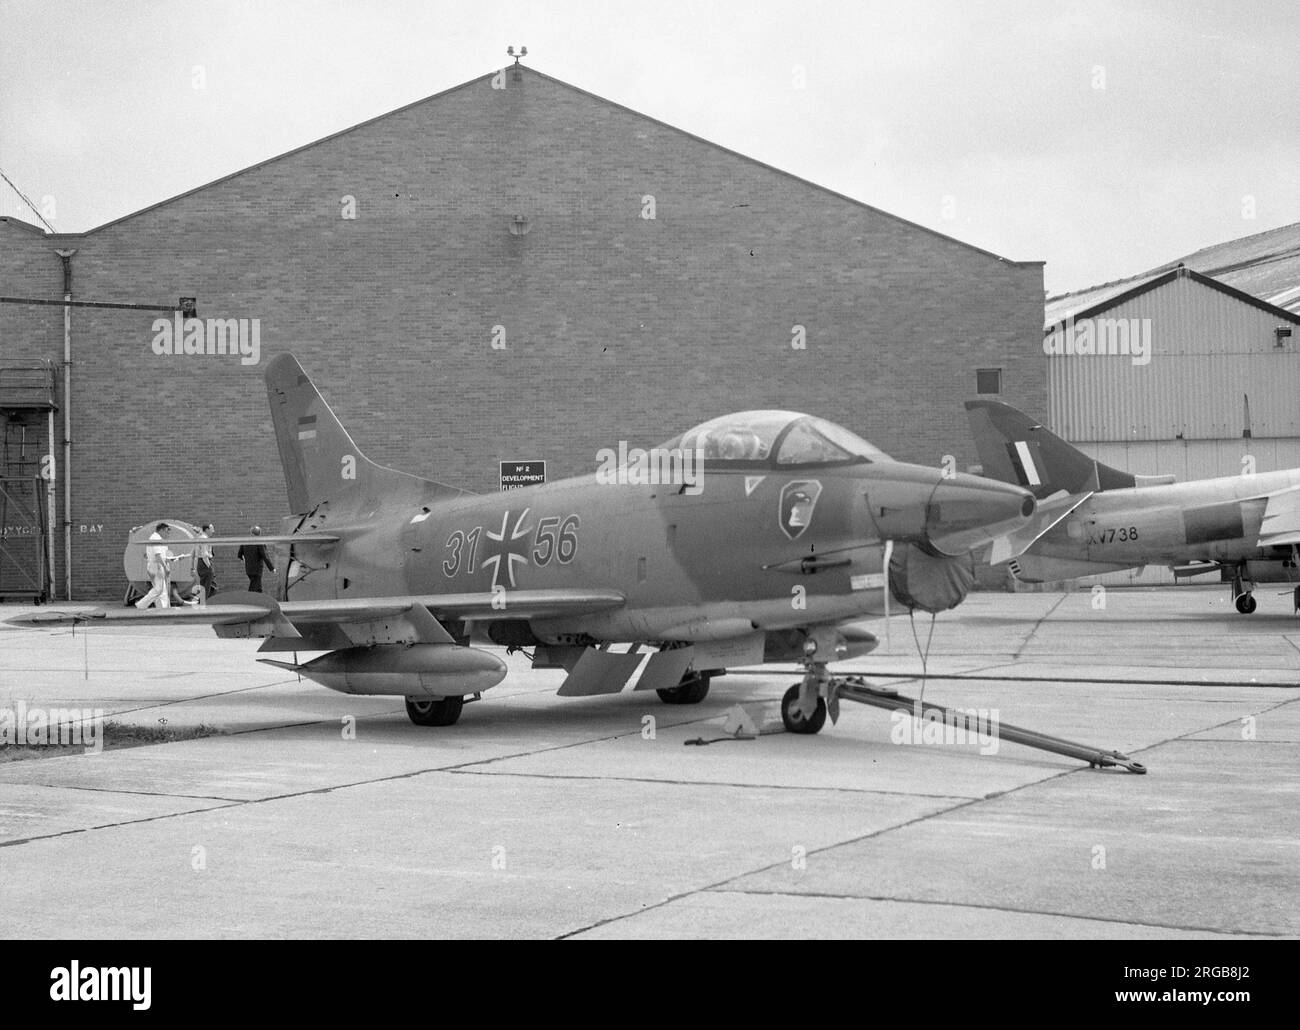 Luftwaffe - Fiat G.91R-3 31+56 (msn D424), of JagdBomberGeschwader 31, at Filton in June 1968, with XV738, the first production Harrier GR.1. Stock Photo